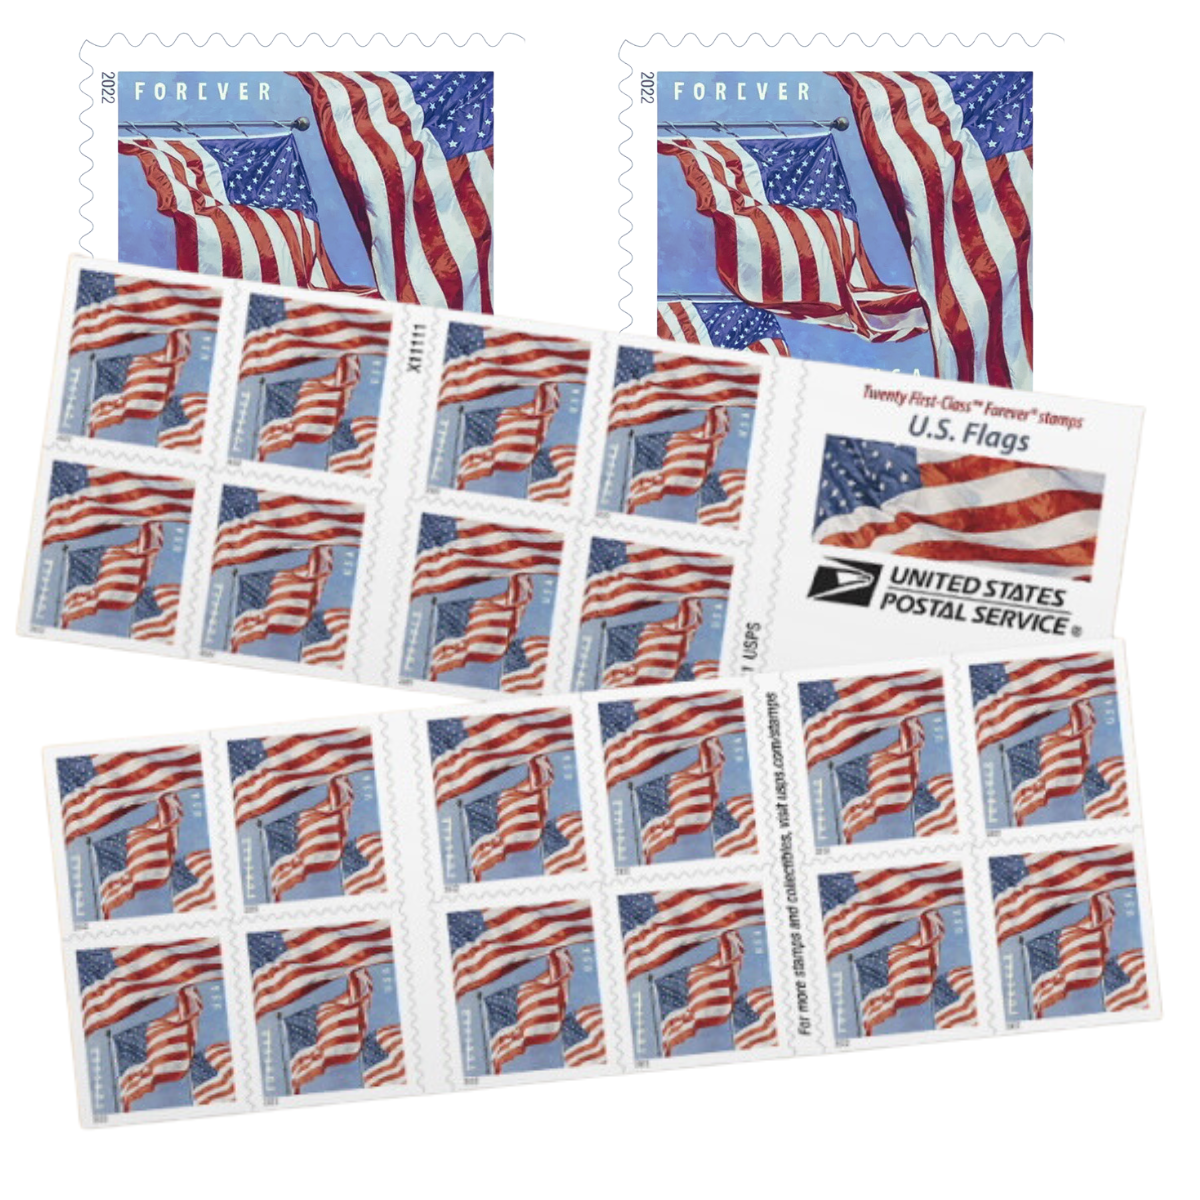 2022 USPS First Class Forever Postage Stamps 5 Sheets of 20 (100 total  mailing stamps)